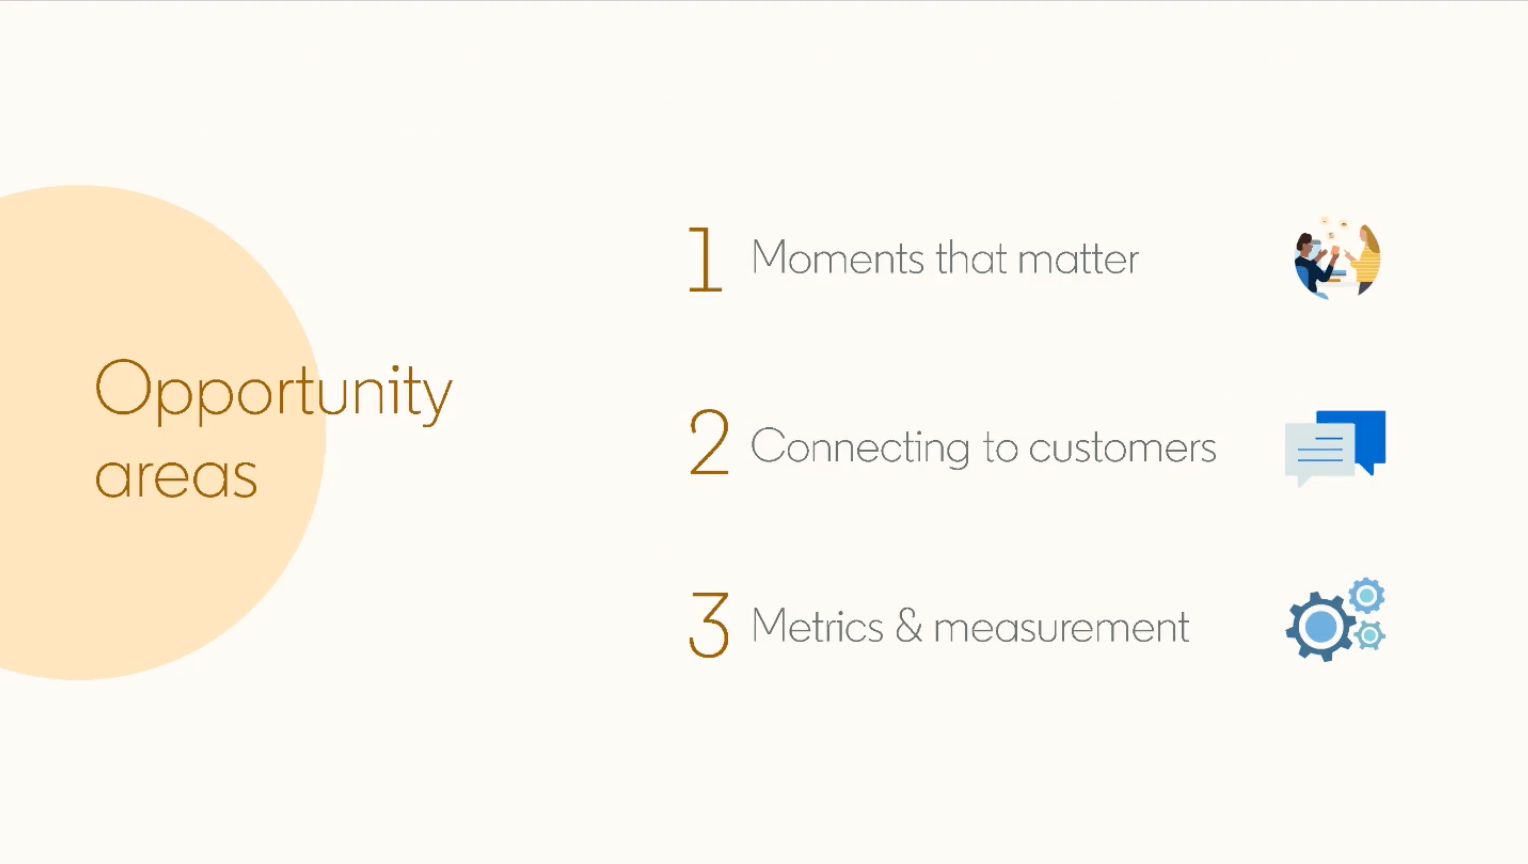 Opportunity areas: moments that matter, connecting to customers, metrics and measurement